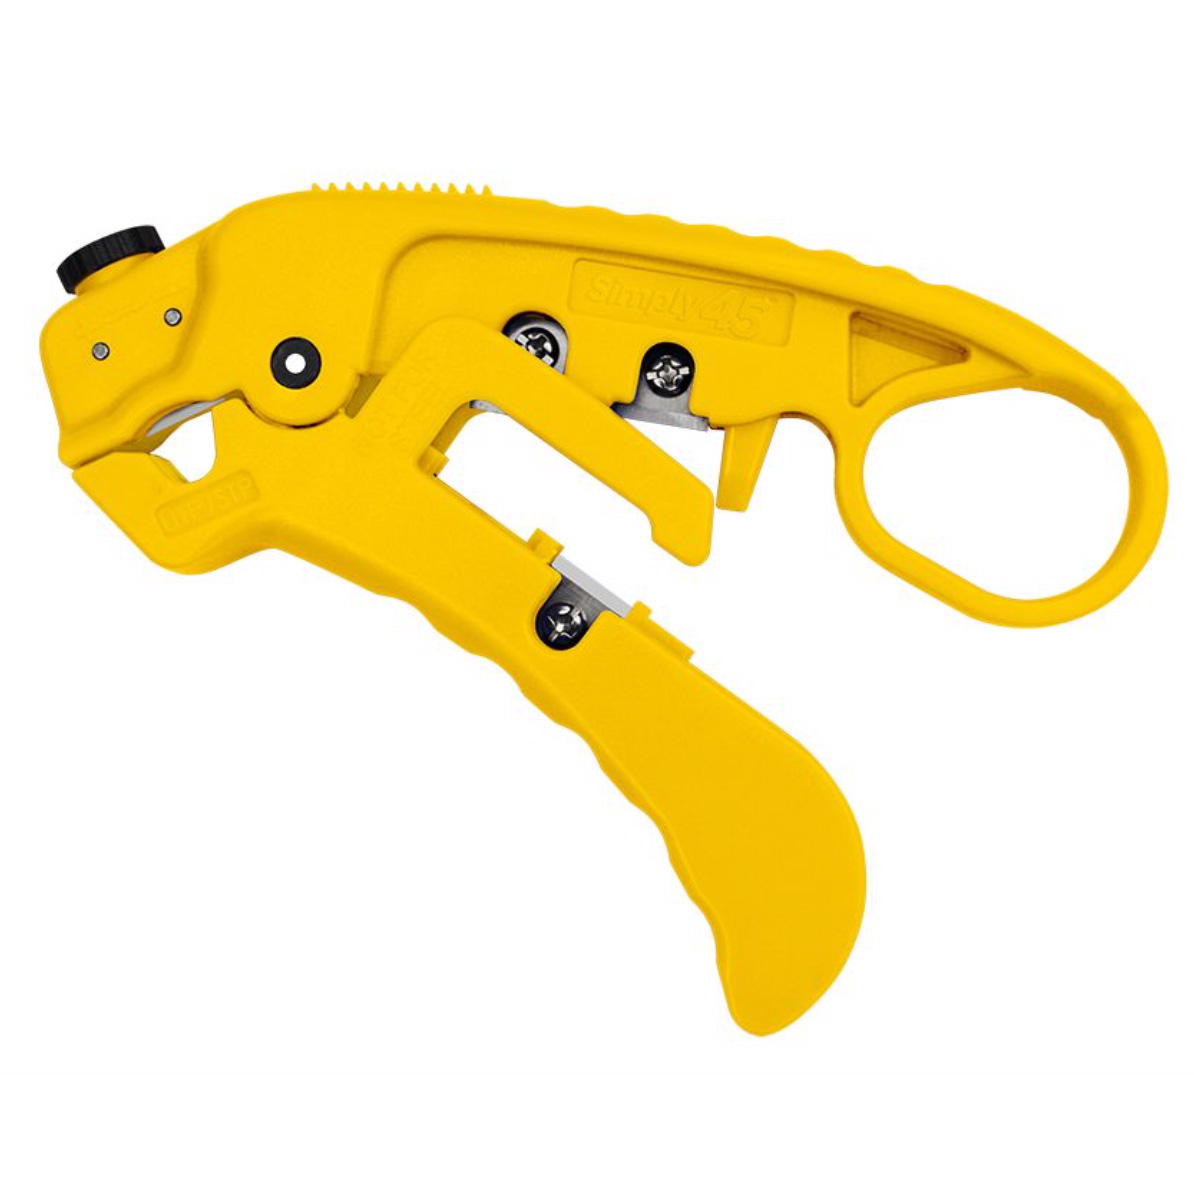 SIMPLY45-STRIP-YL Professional LAN Cable Stripper